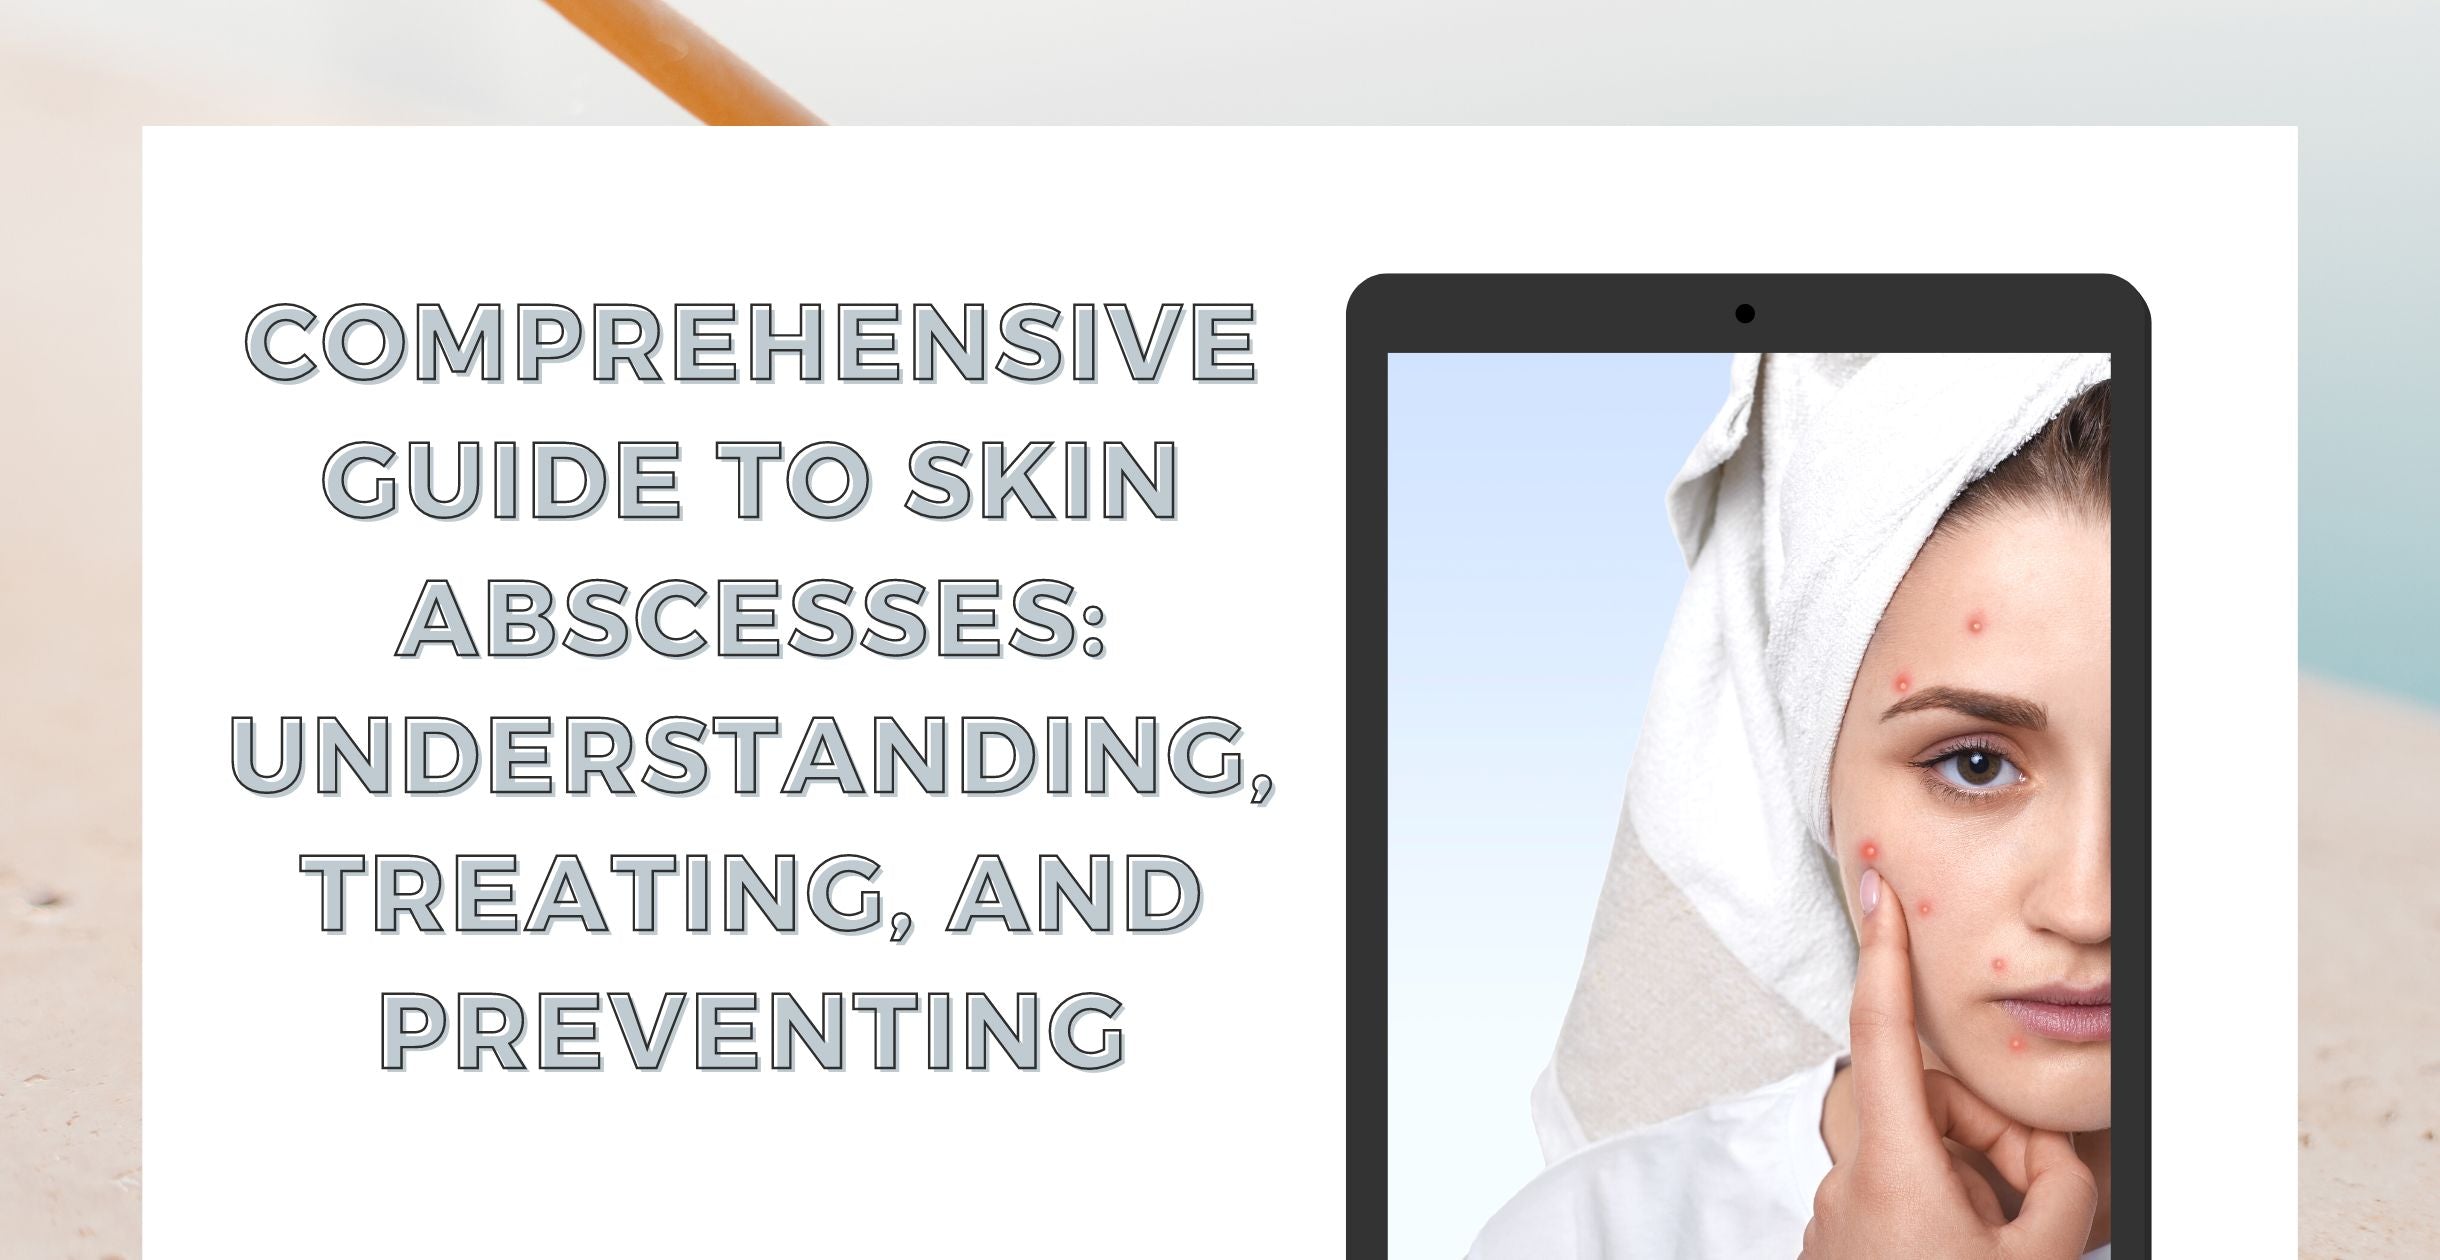 Comprehensive Guide to Skin Abscesses: Understanding, Treating, and Preventing